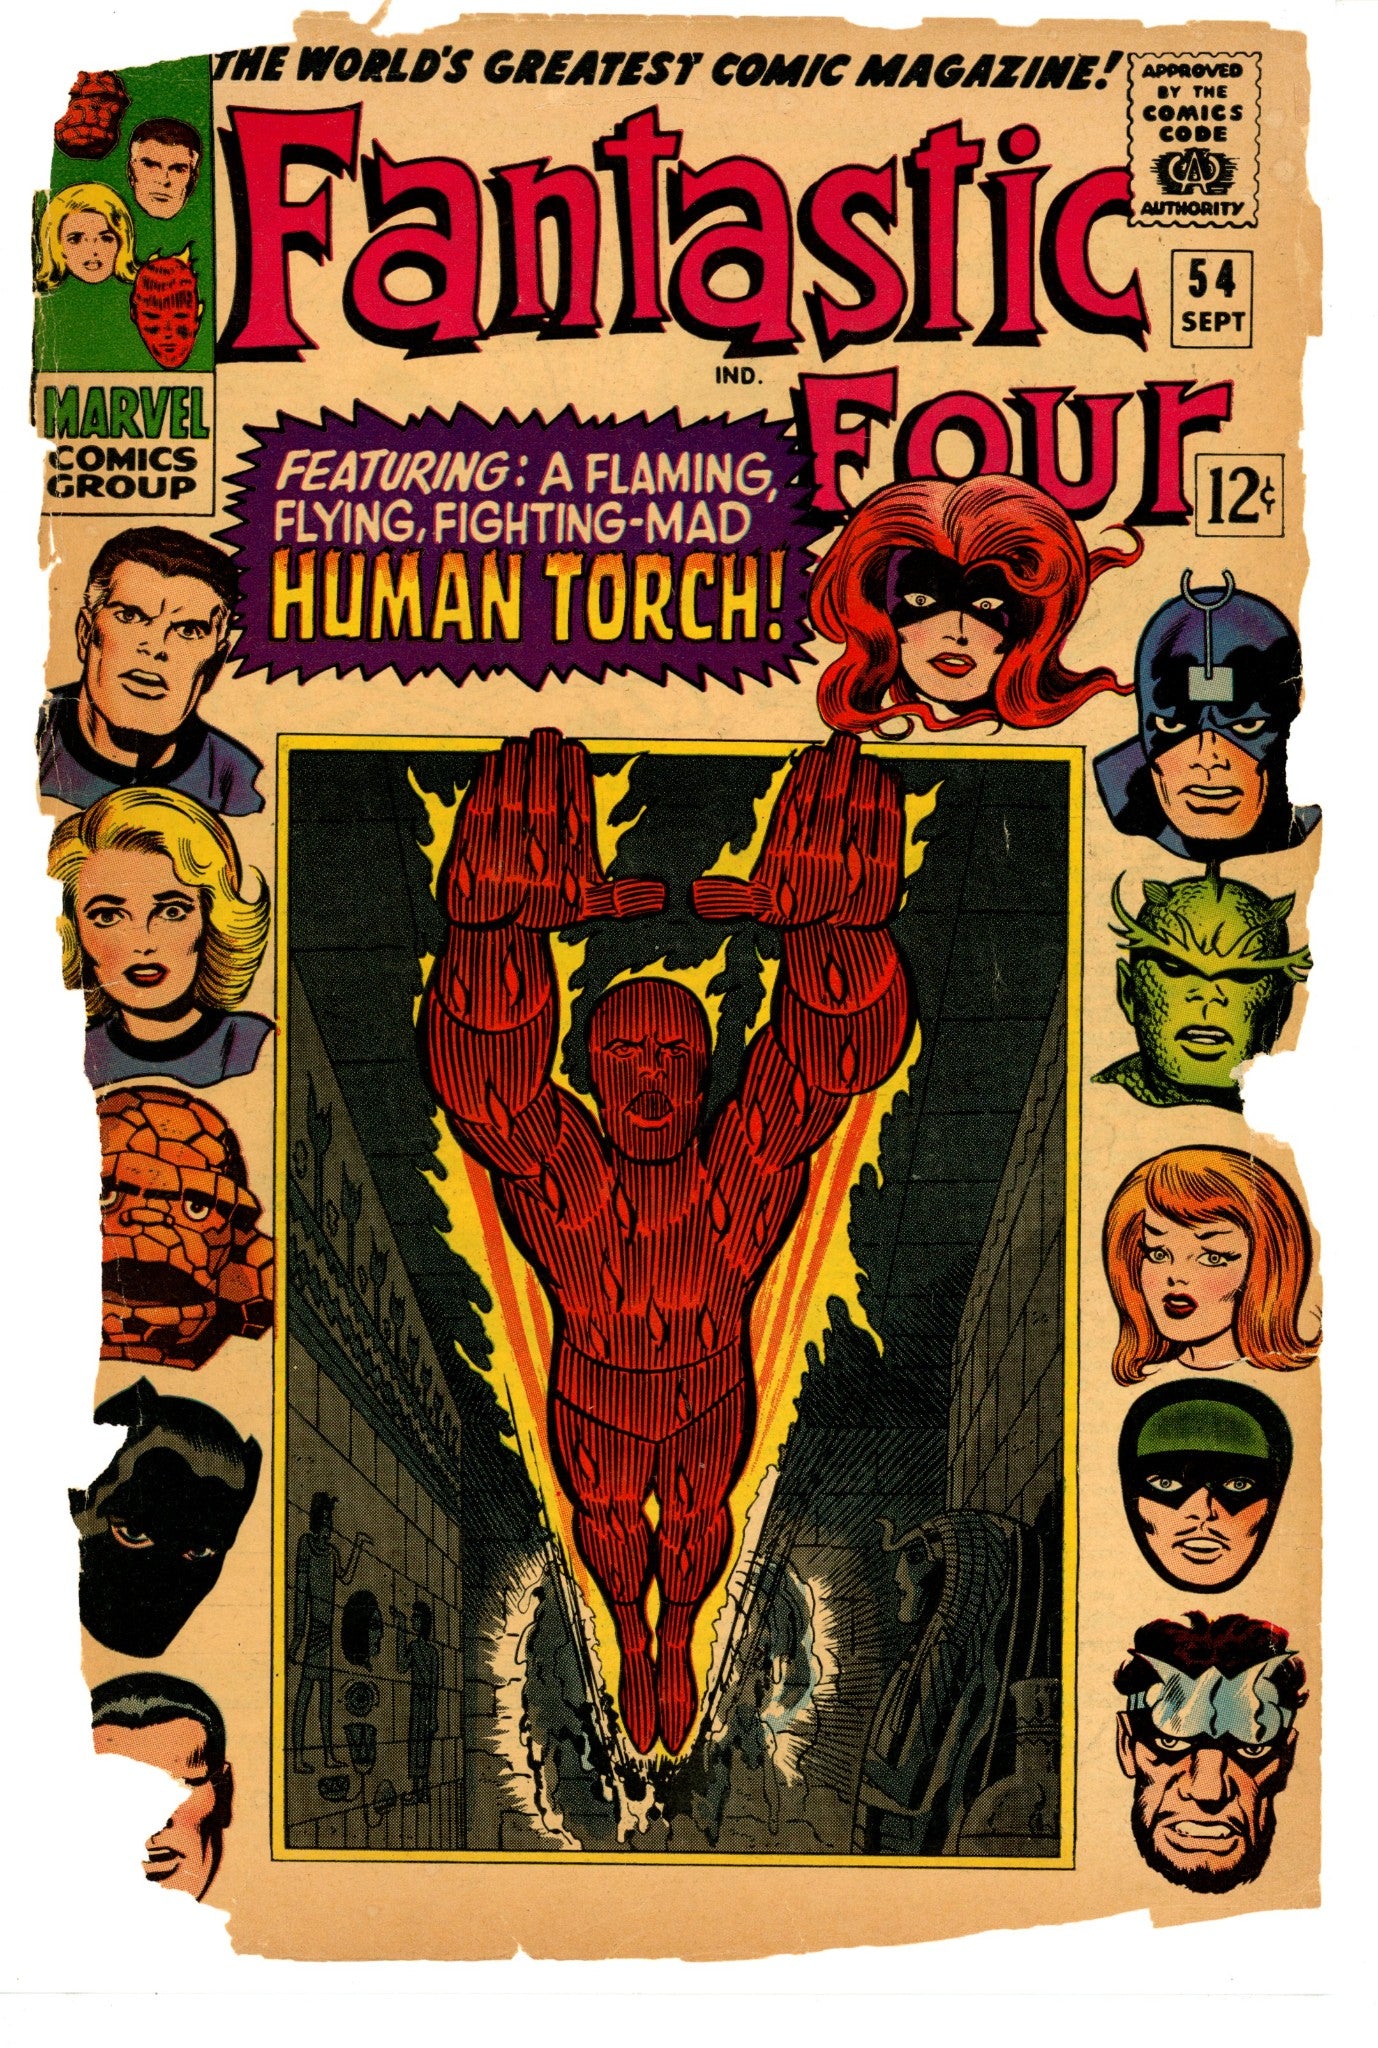 Fantastic Four Vol 1 54 Front Cover Only (1966) 